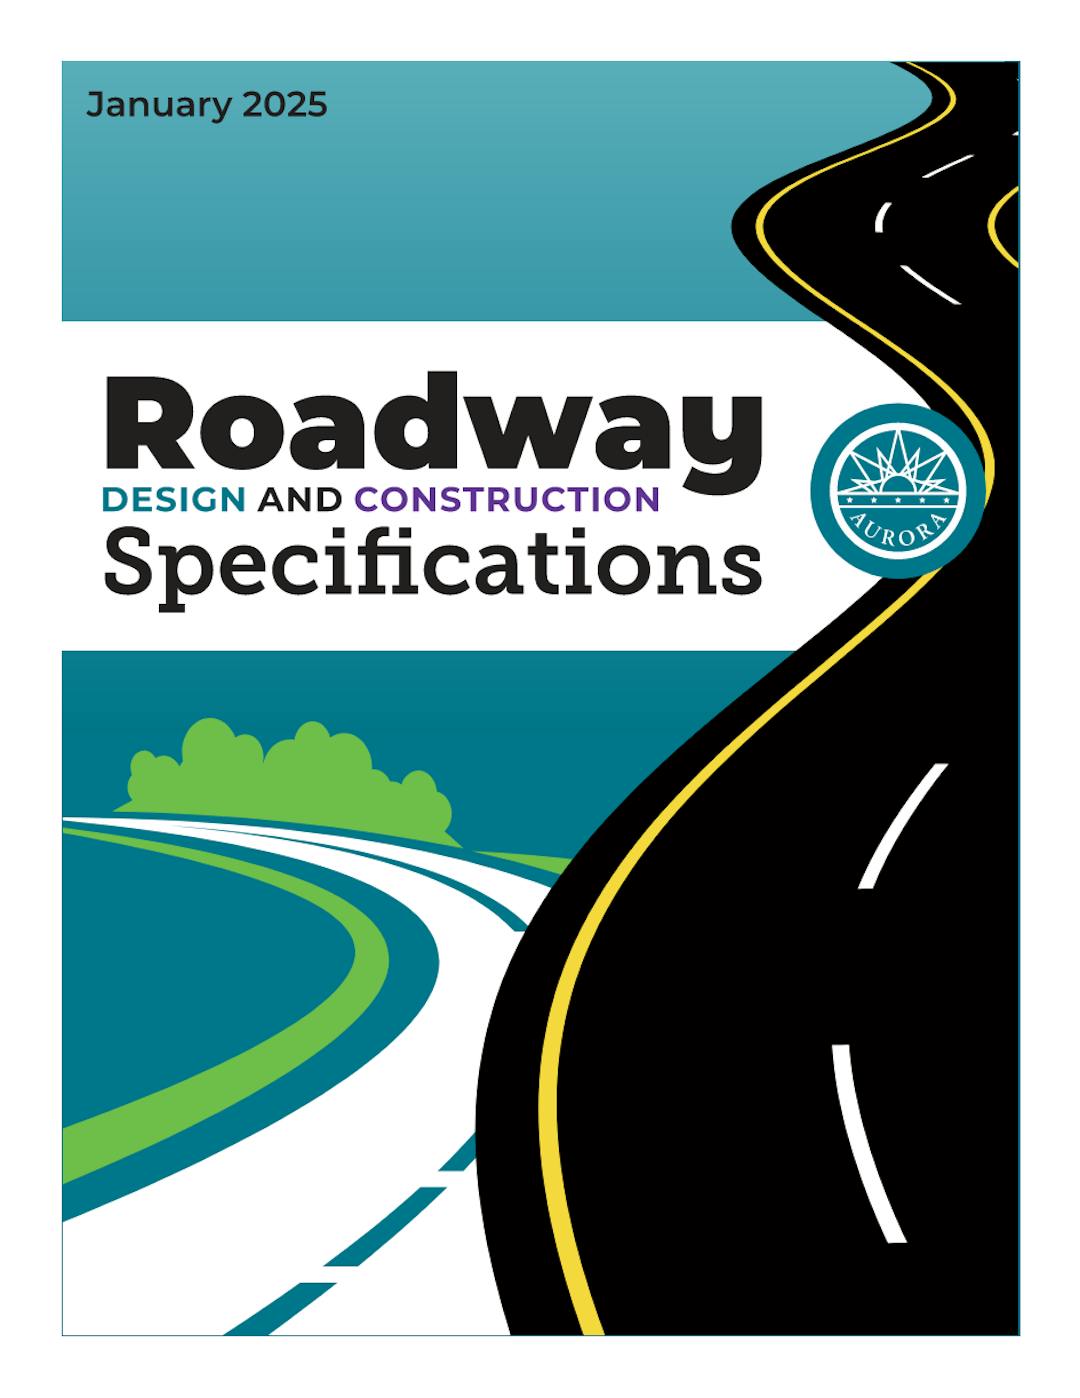 Image of cover of roadway manual with silhouettes of cars, traffic signals and a road